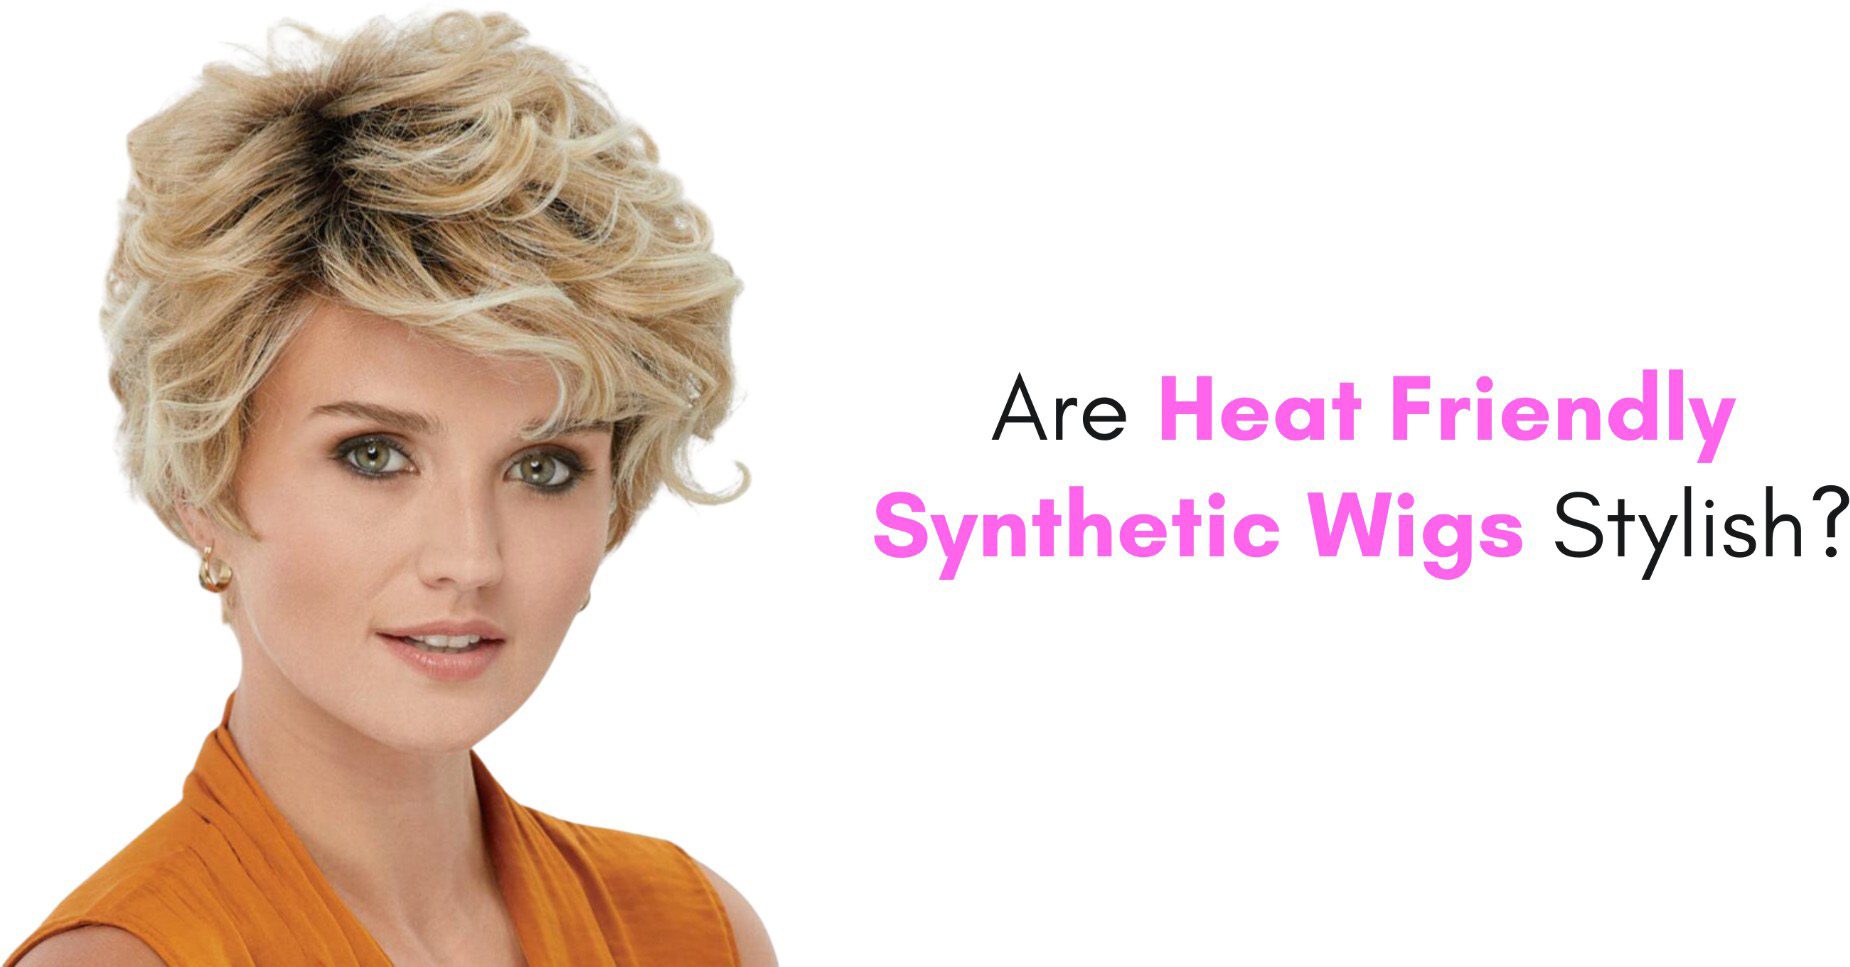 Are Heat Friendly Synthetic Wigs Stylish?